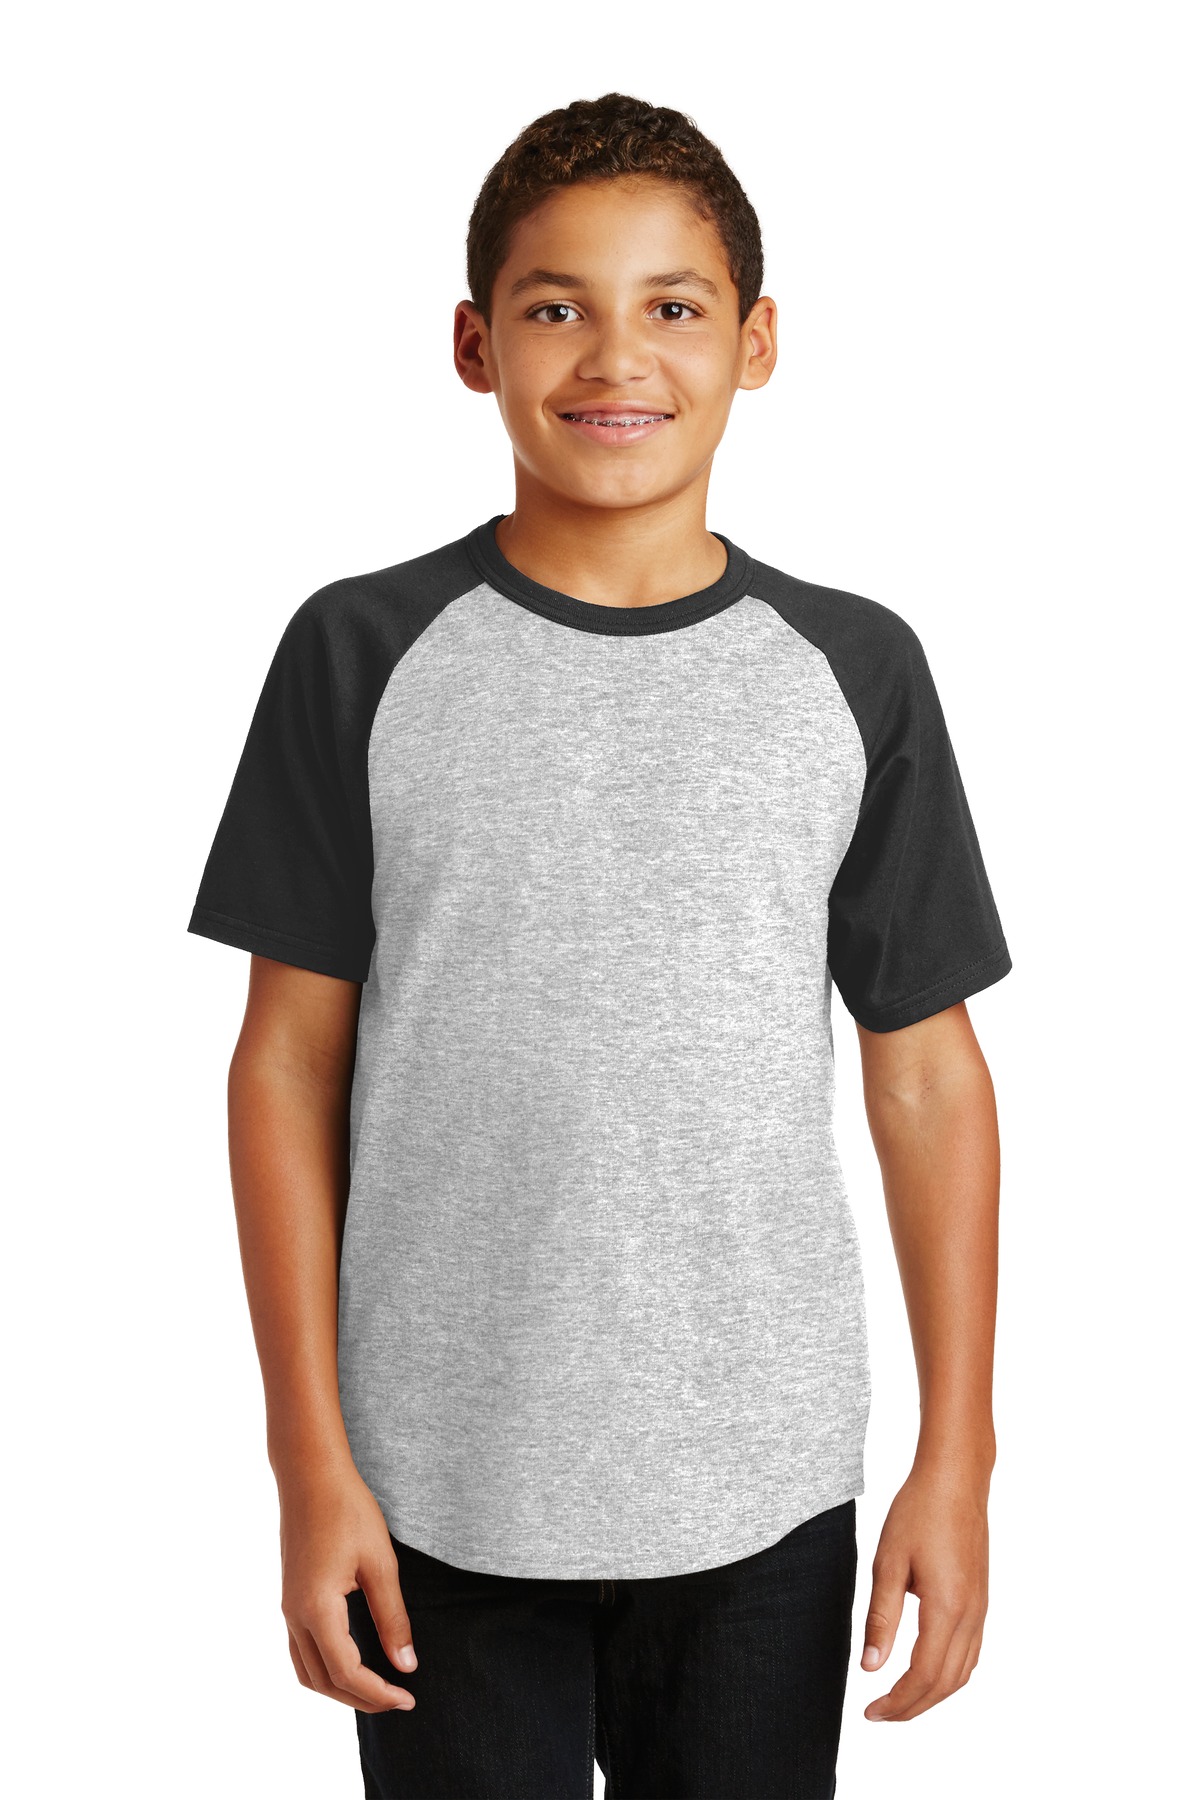 Front view of Youth Short Sleeve Colorblock Raglan Jersey